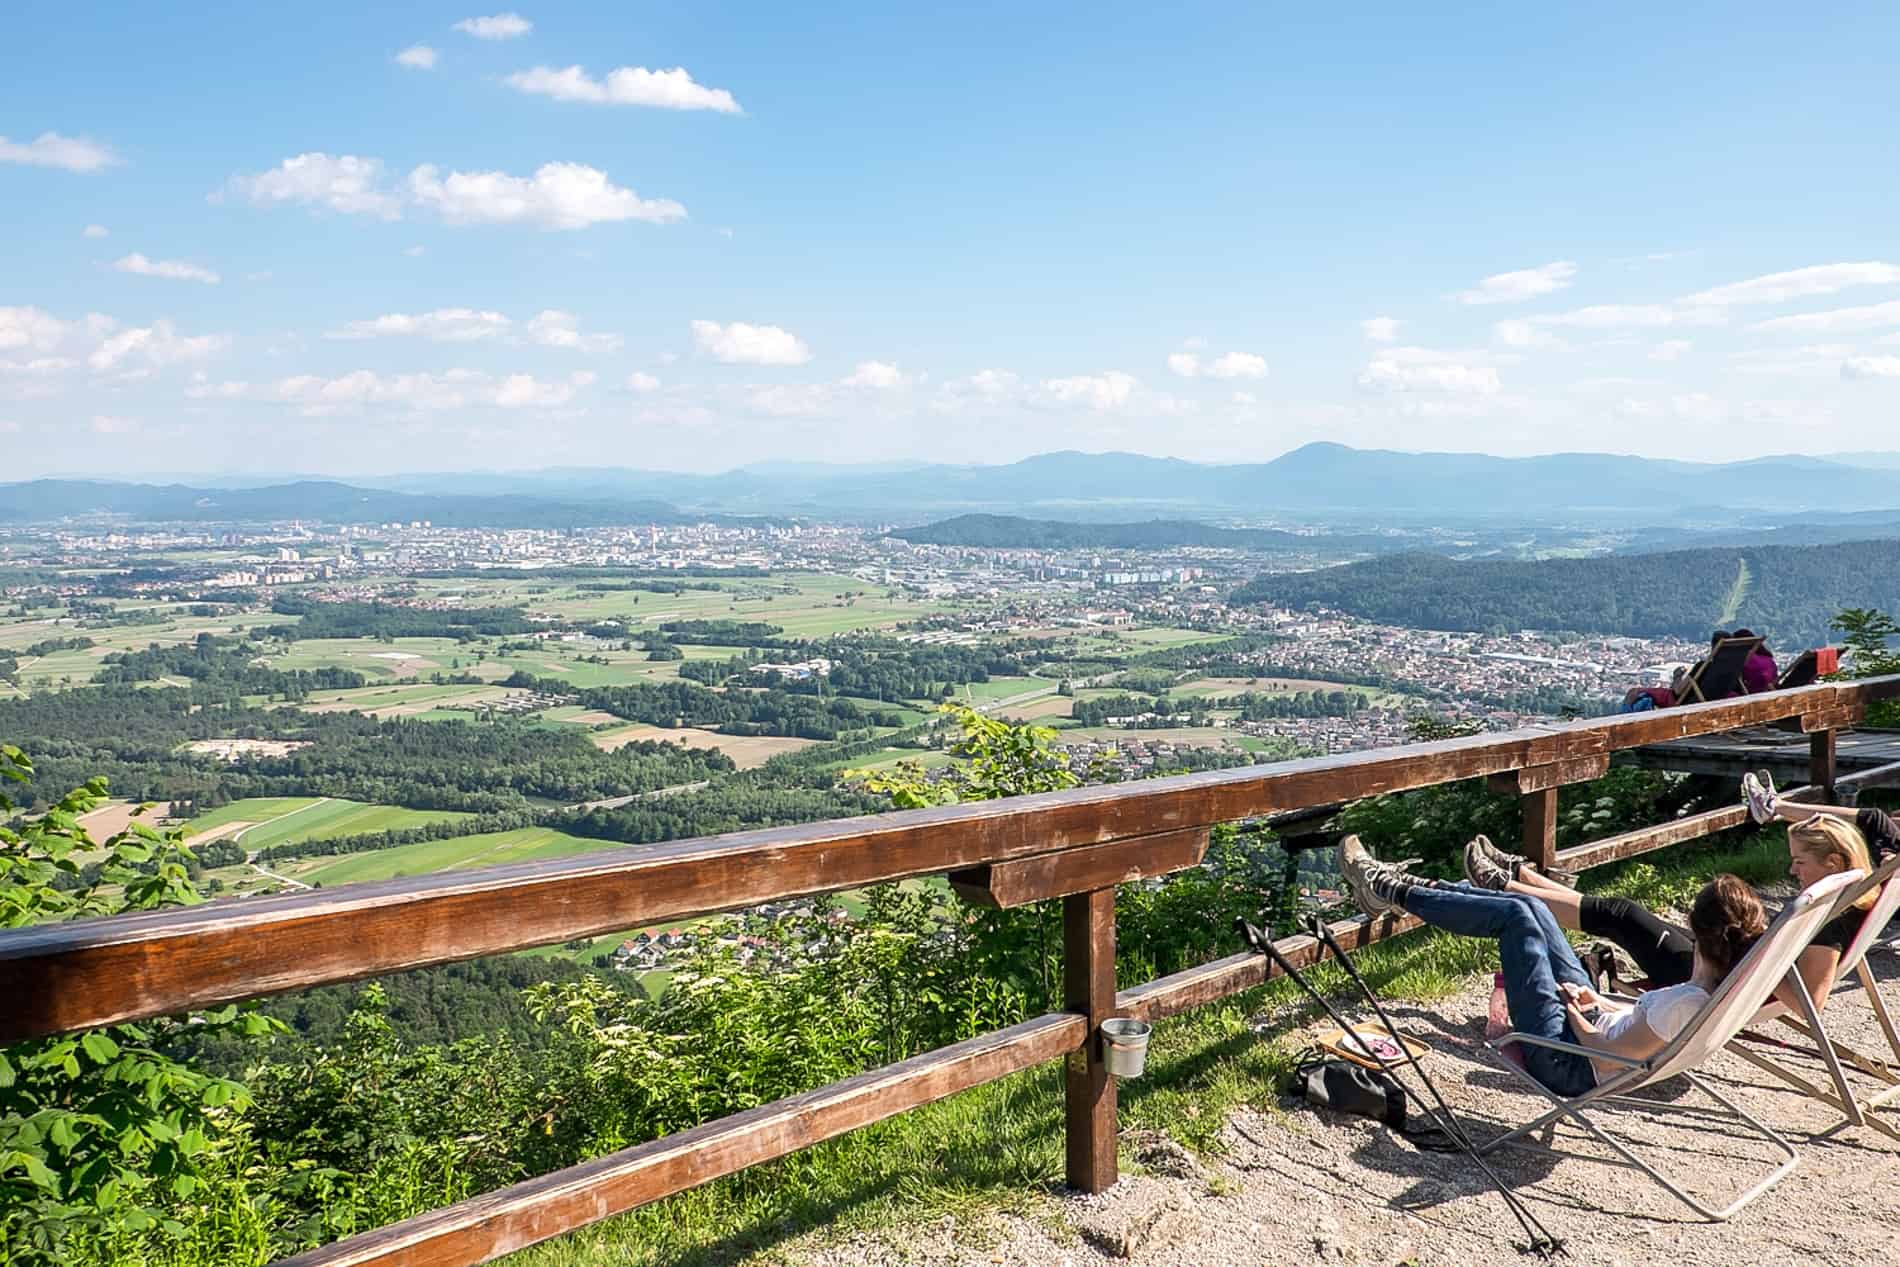 People resting after trekking up to the lookout point of Smarna Gora Mountain near Ljubljana.